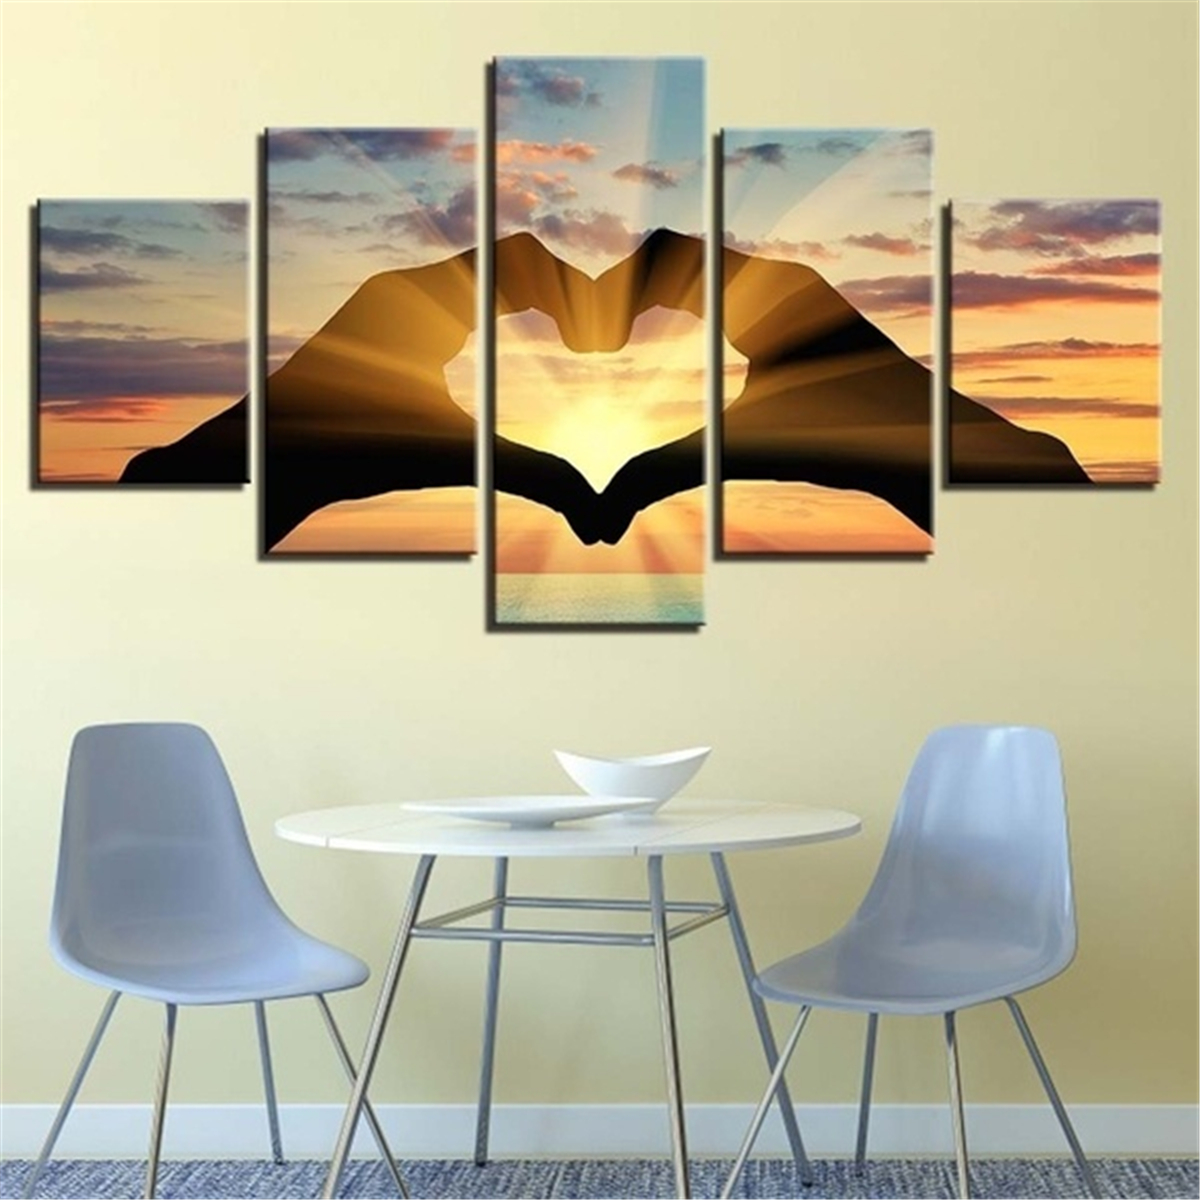 5-Pcs-Wall-Decorative-Painting-Couple-Love-Group-Wall-Decor-Art-Pictures-Canvas-Prints-Home-Office-H-1688799-3